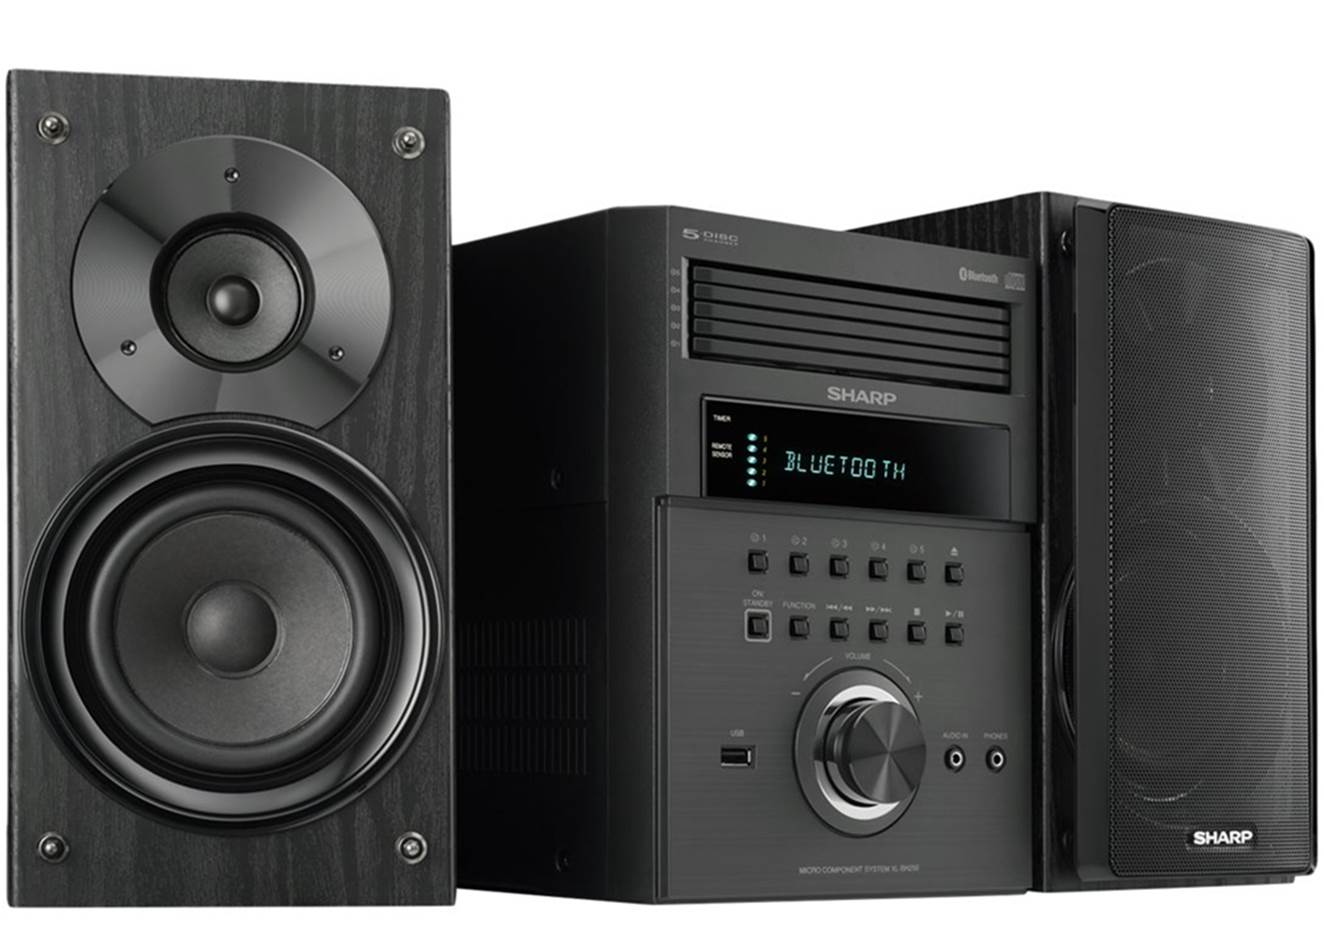 Top 10 Home Stereo Systems In 2020 Bass Head Speakers